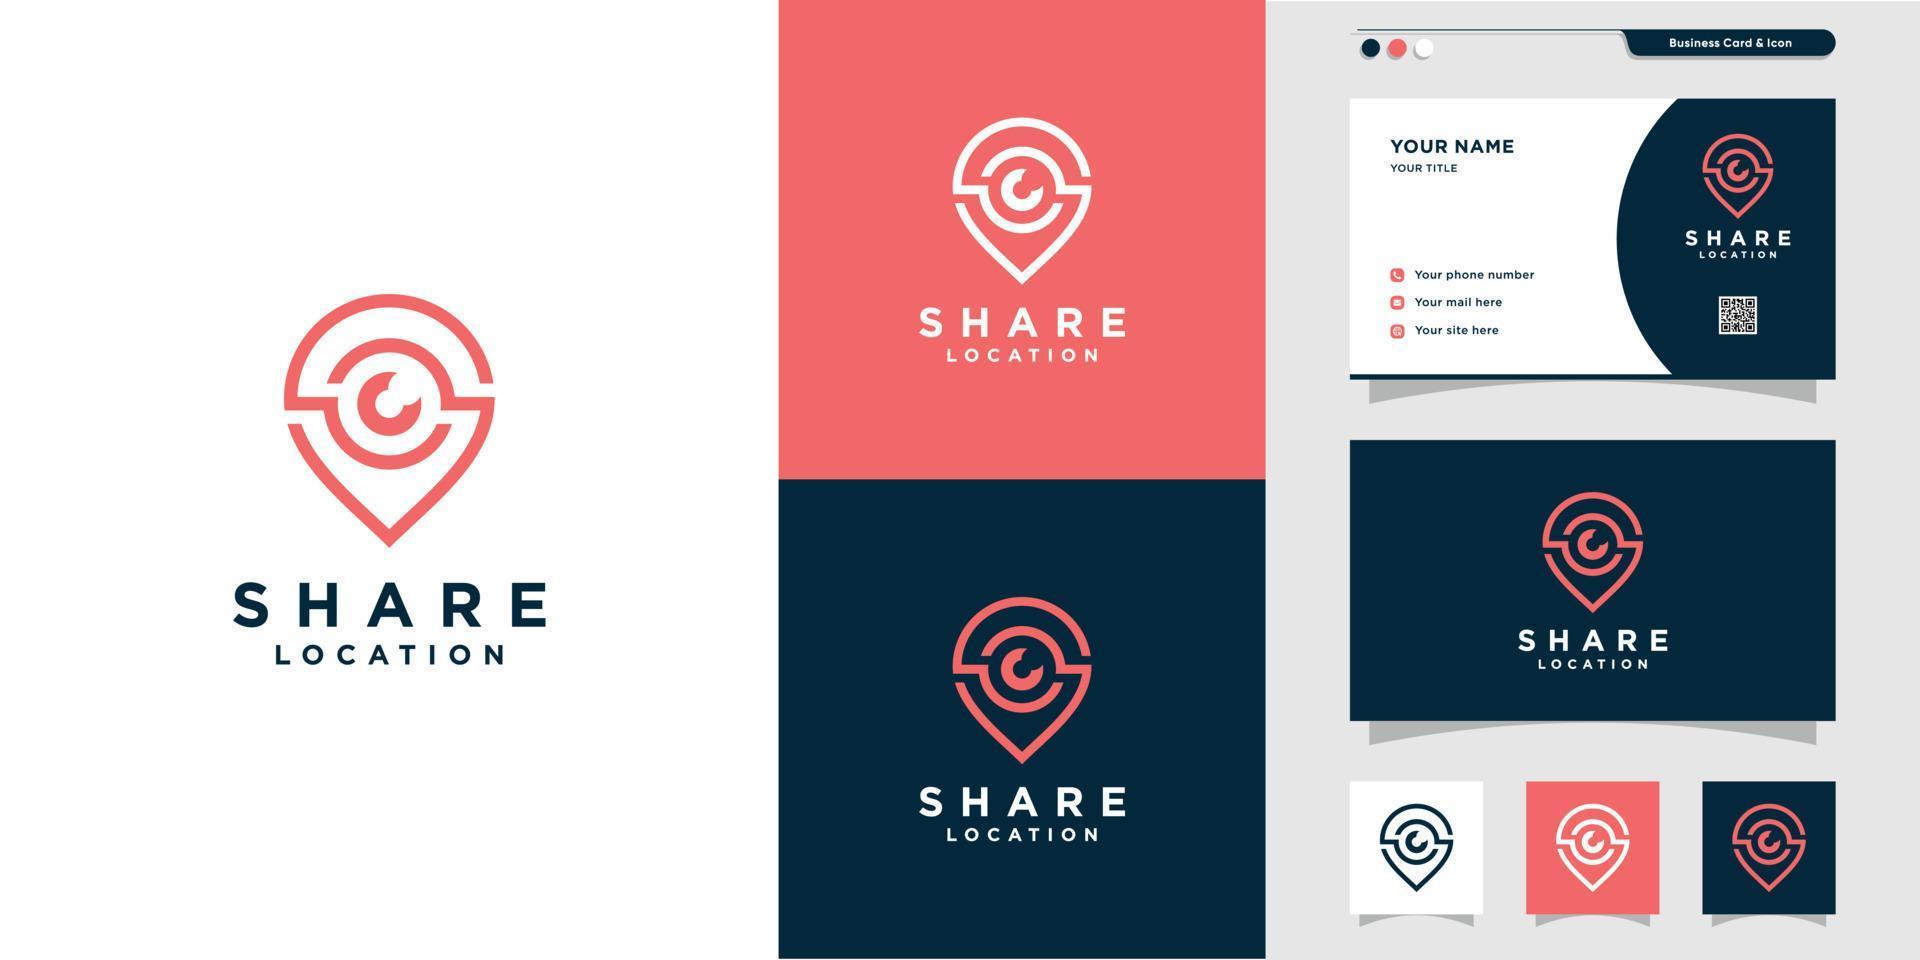 Pin share logo and business card design with line art style. line art, place, map, location, business card, icon, pin logo, Premium Vector